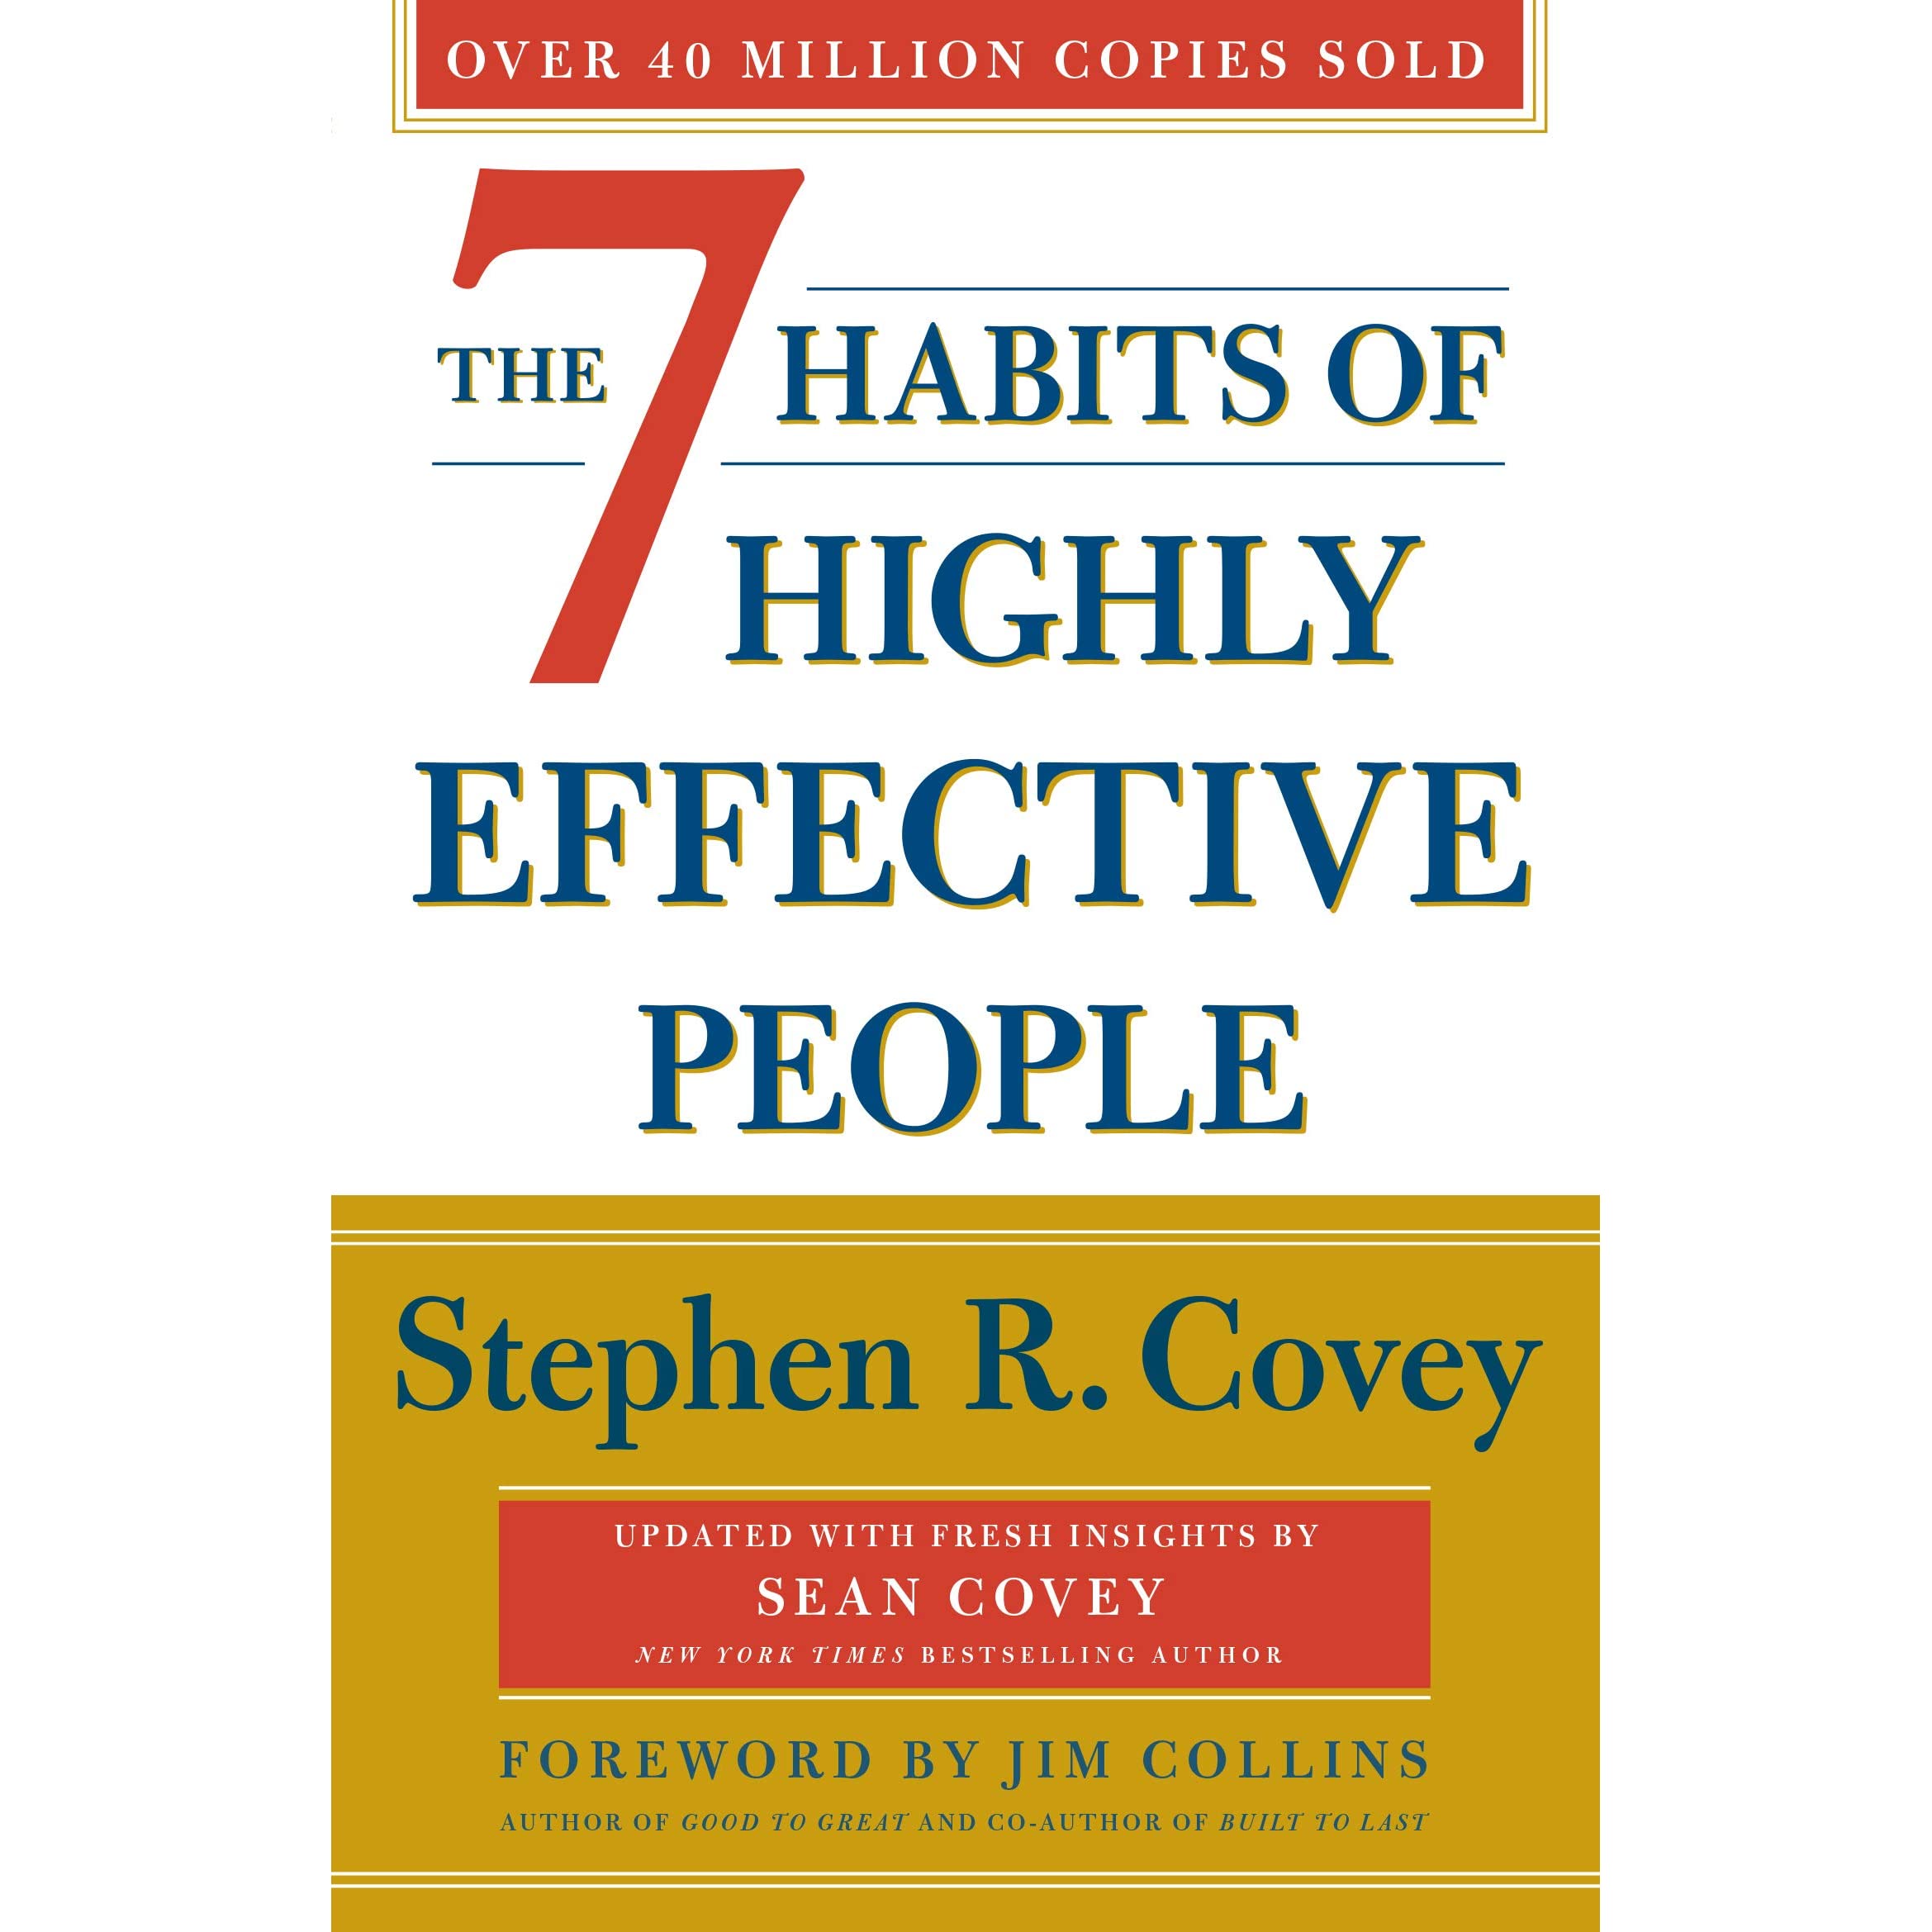 The 7 Habits of Highly Effective People 